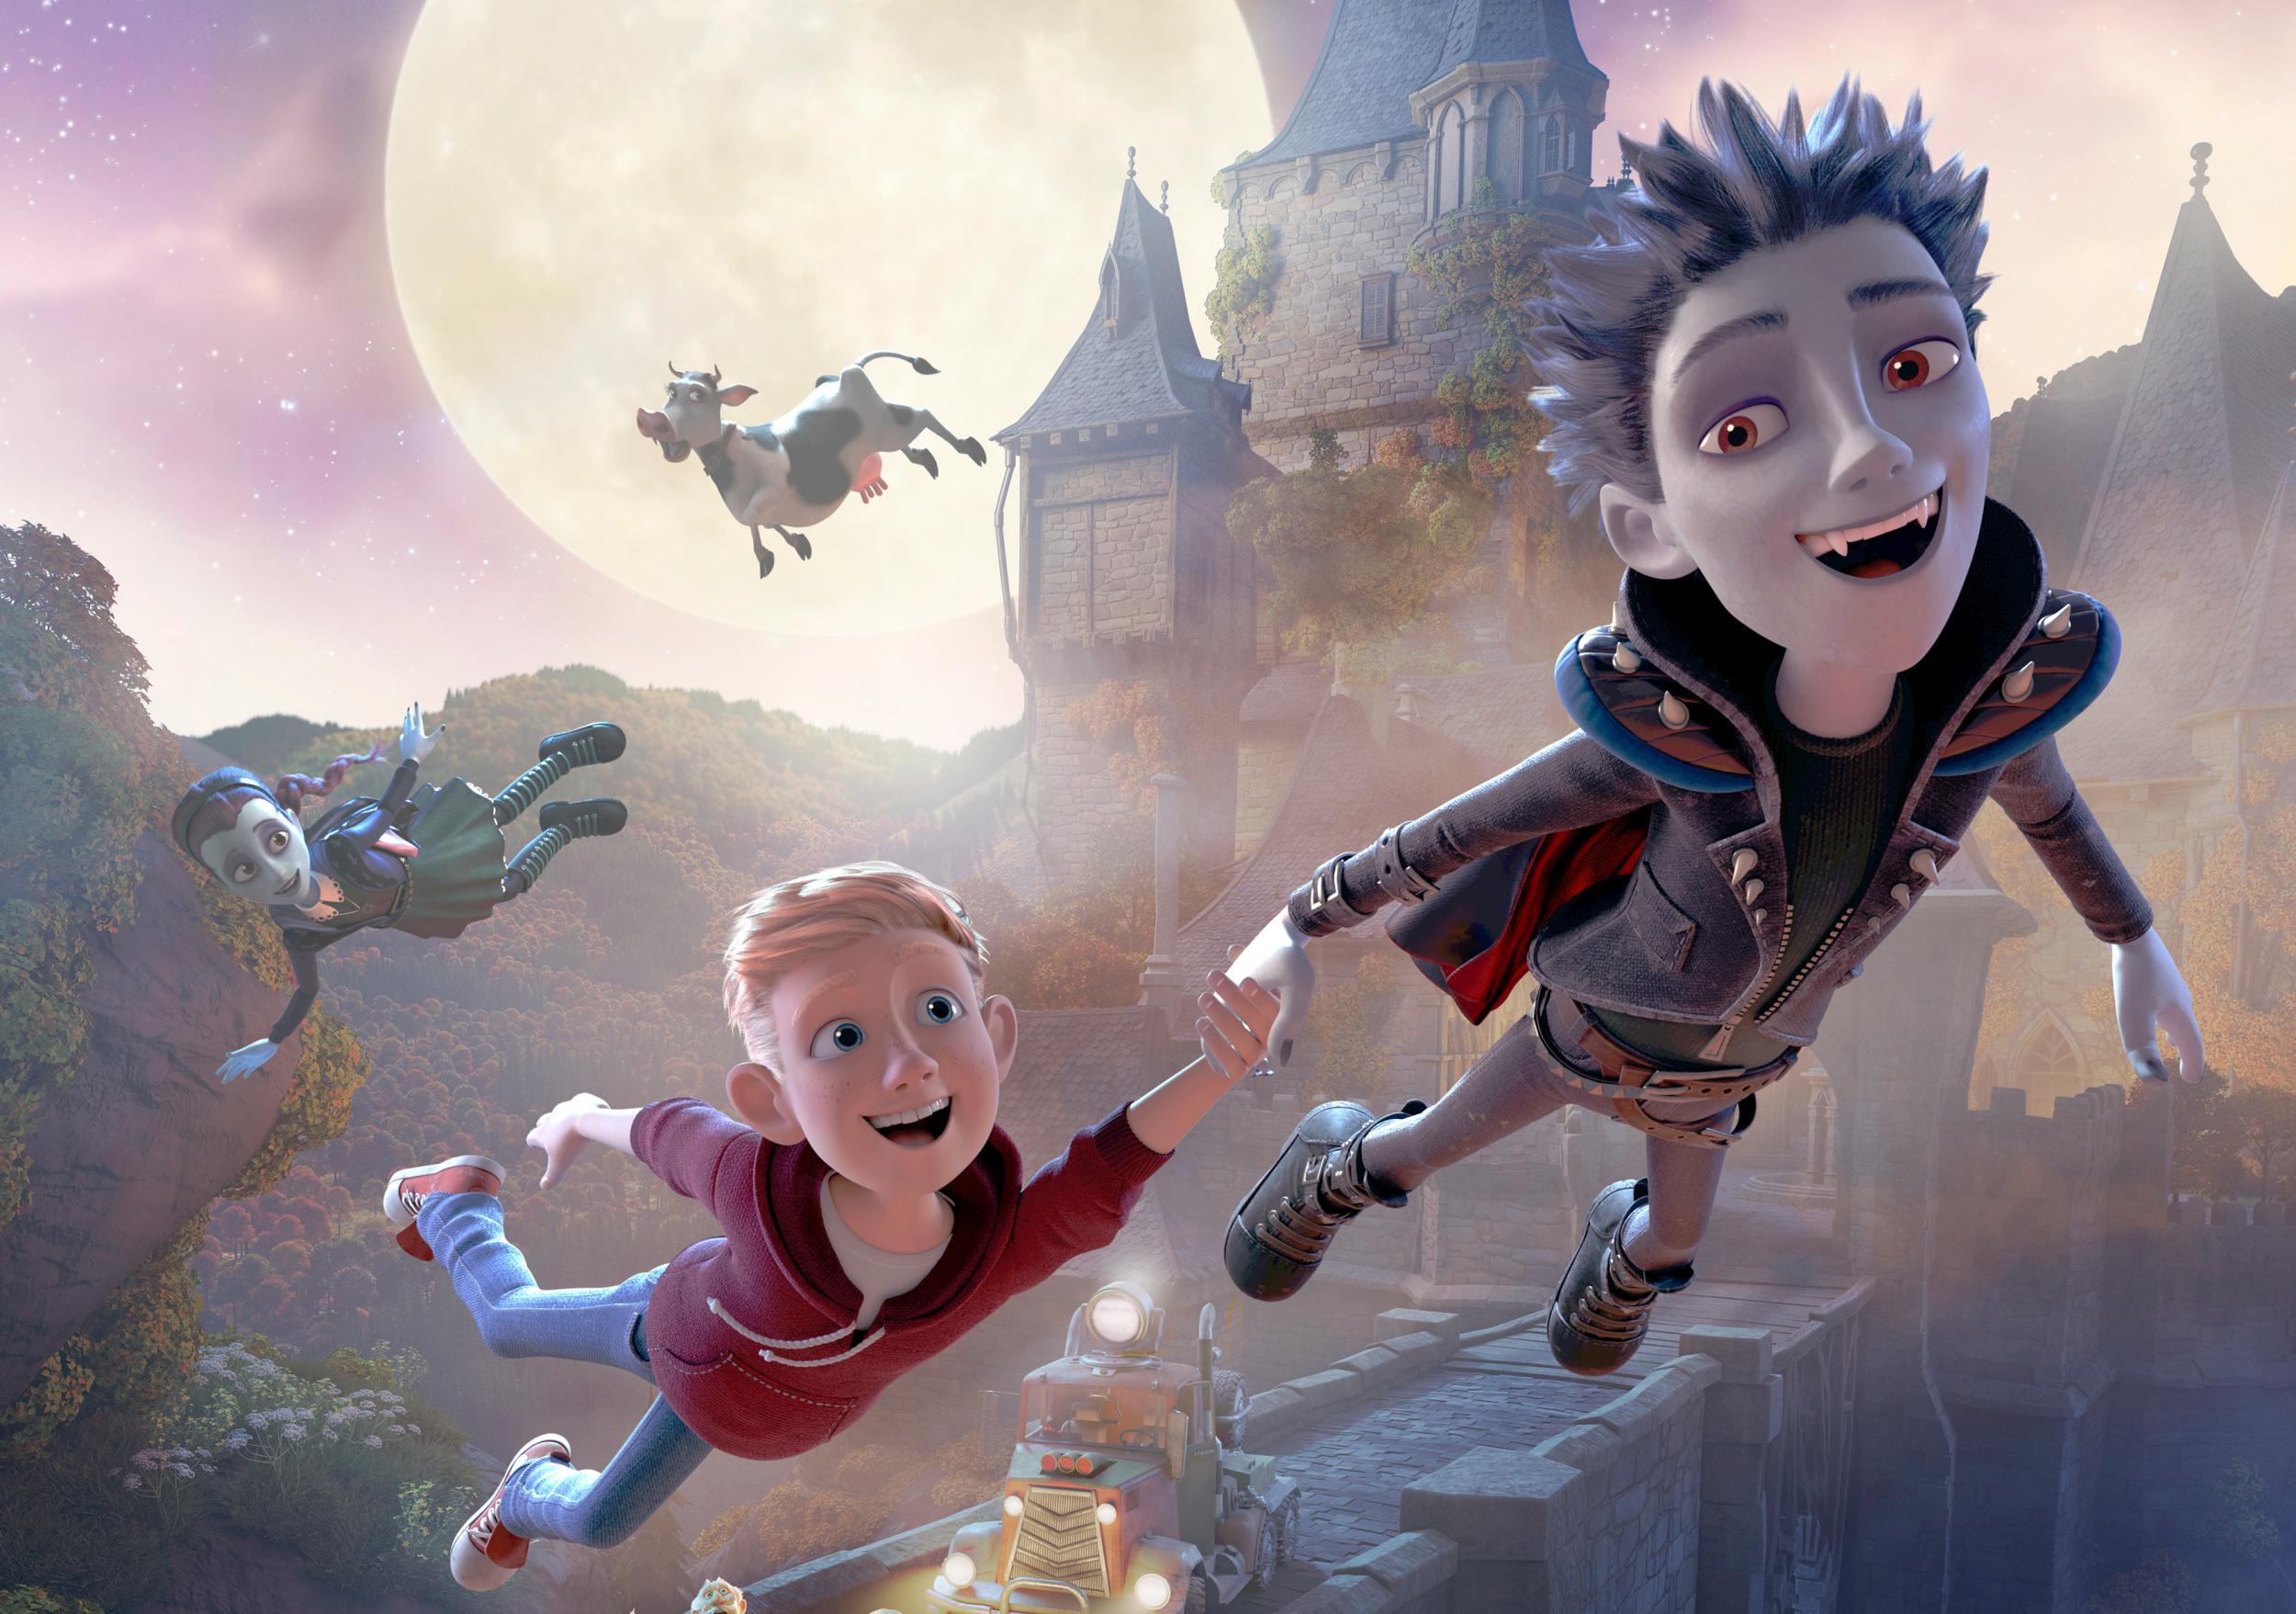 The Little Vampire review: anaemic entertainment with no bite